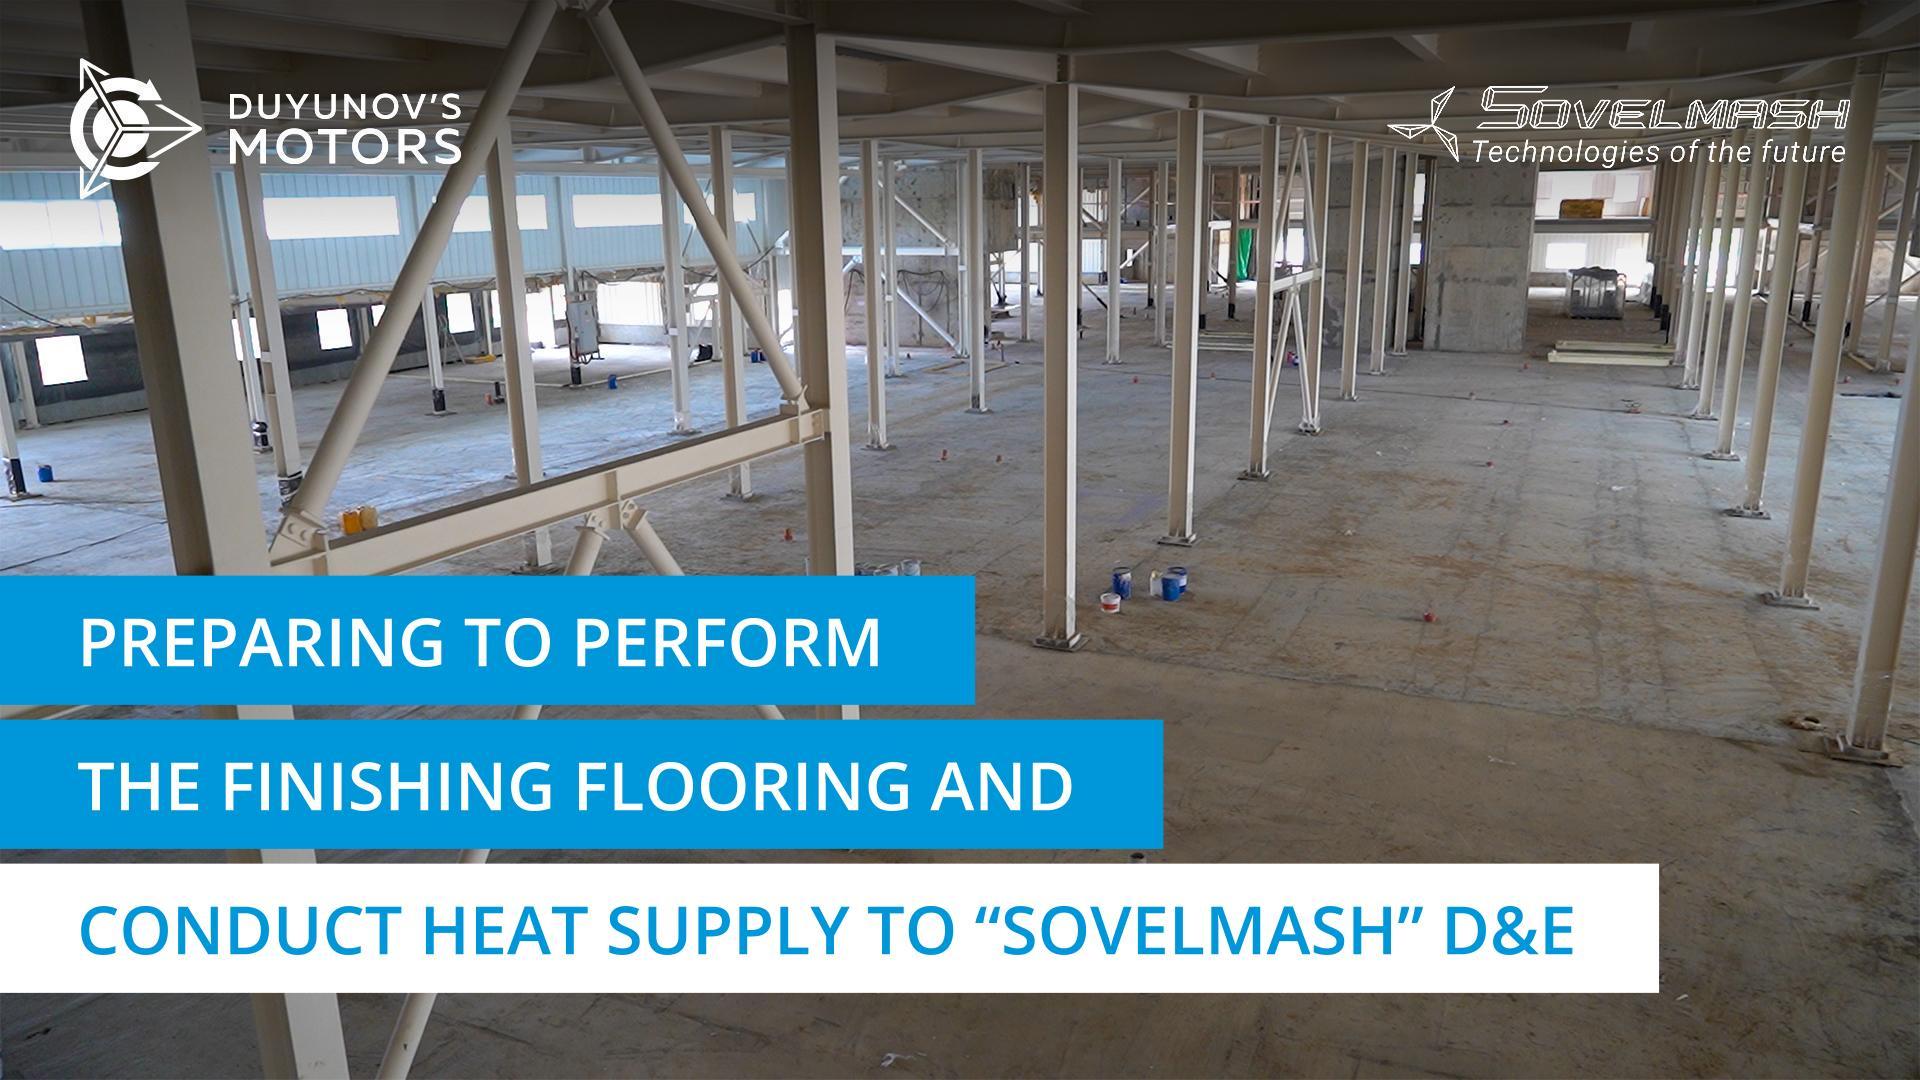 Preparing to perform the finishing flooring and conduct the heat supply in the "Sovelmash" D&E